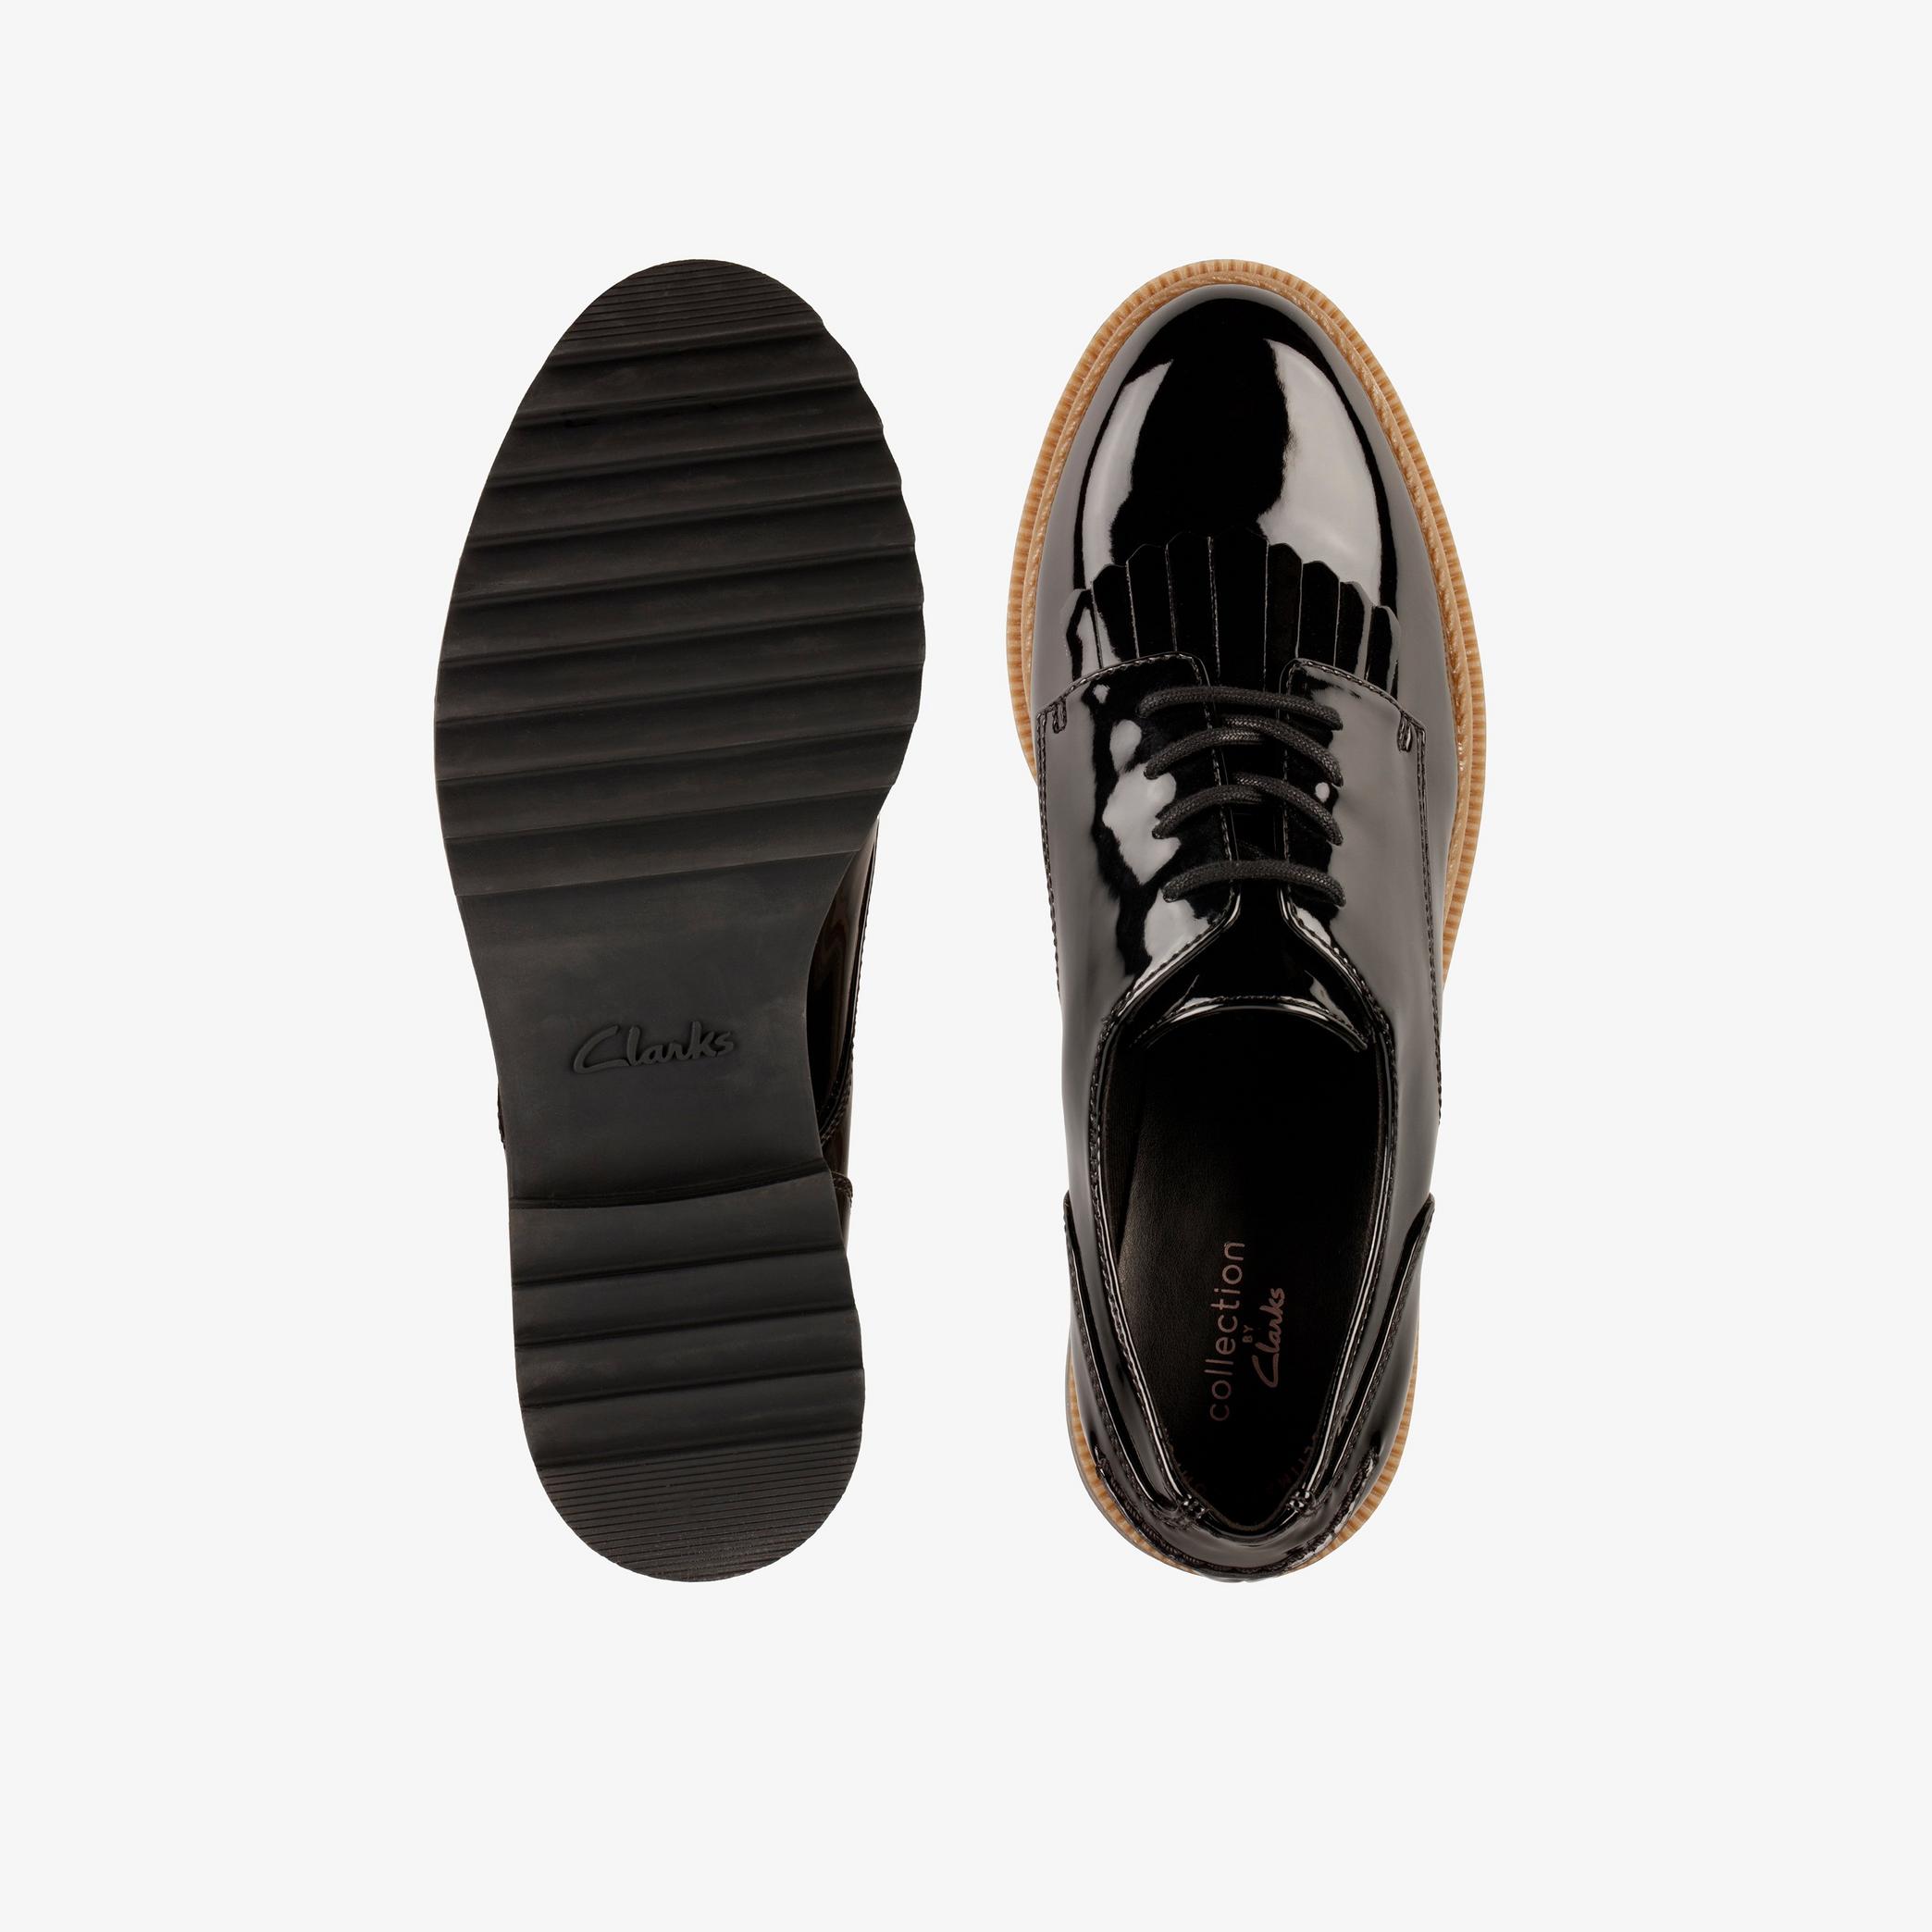 WOMENS Griffin Mabel Black Patent Brogues | Clarks Outlet